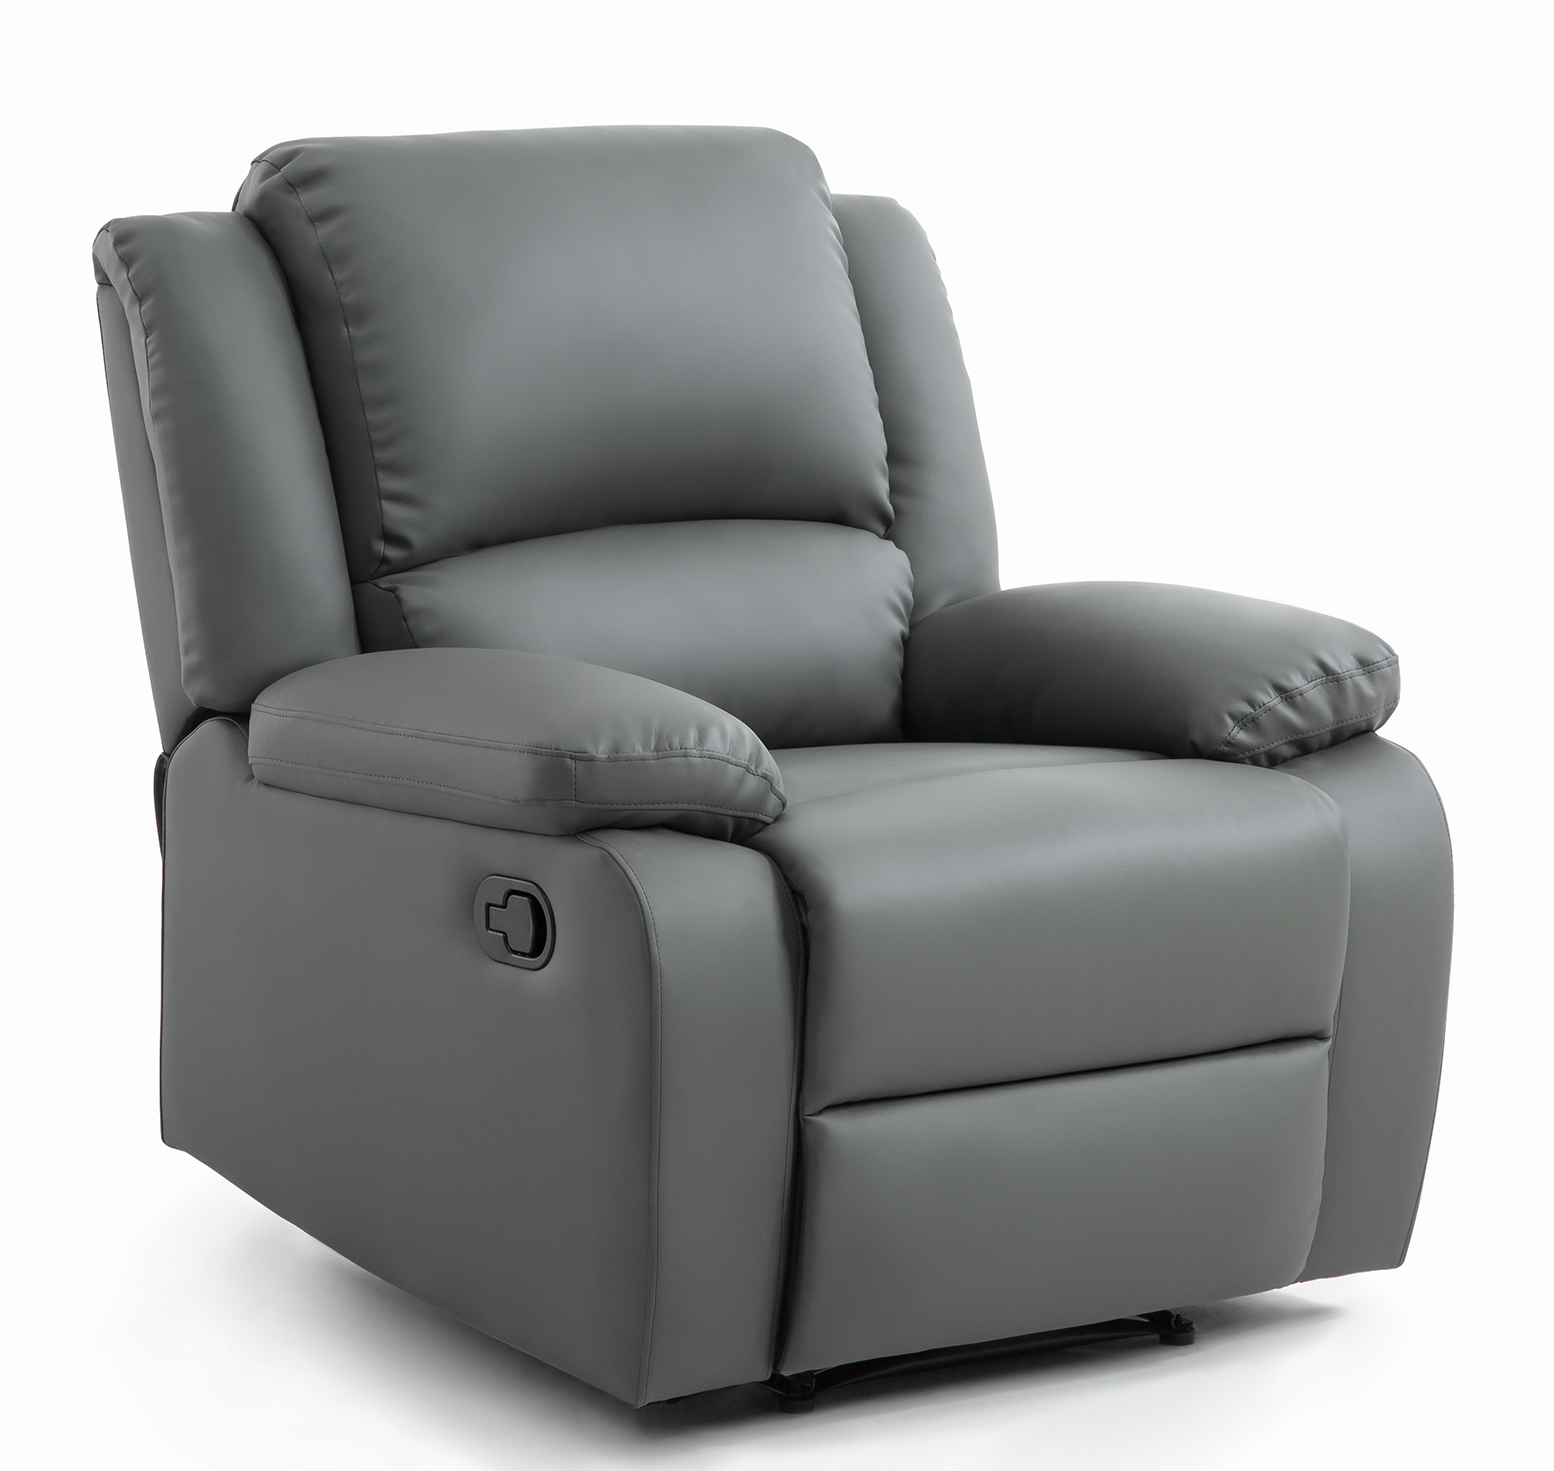 Fauteuil relax simili cuir